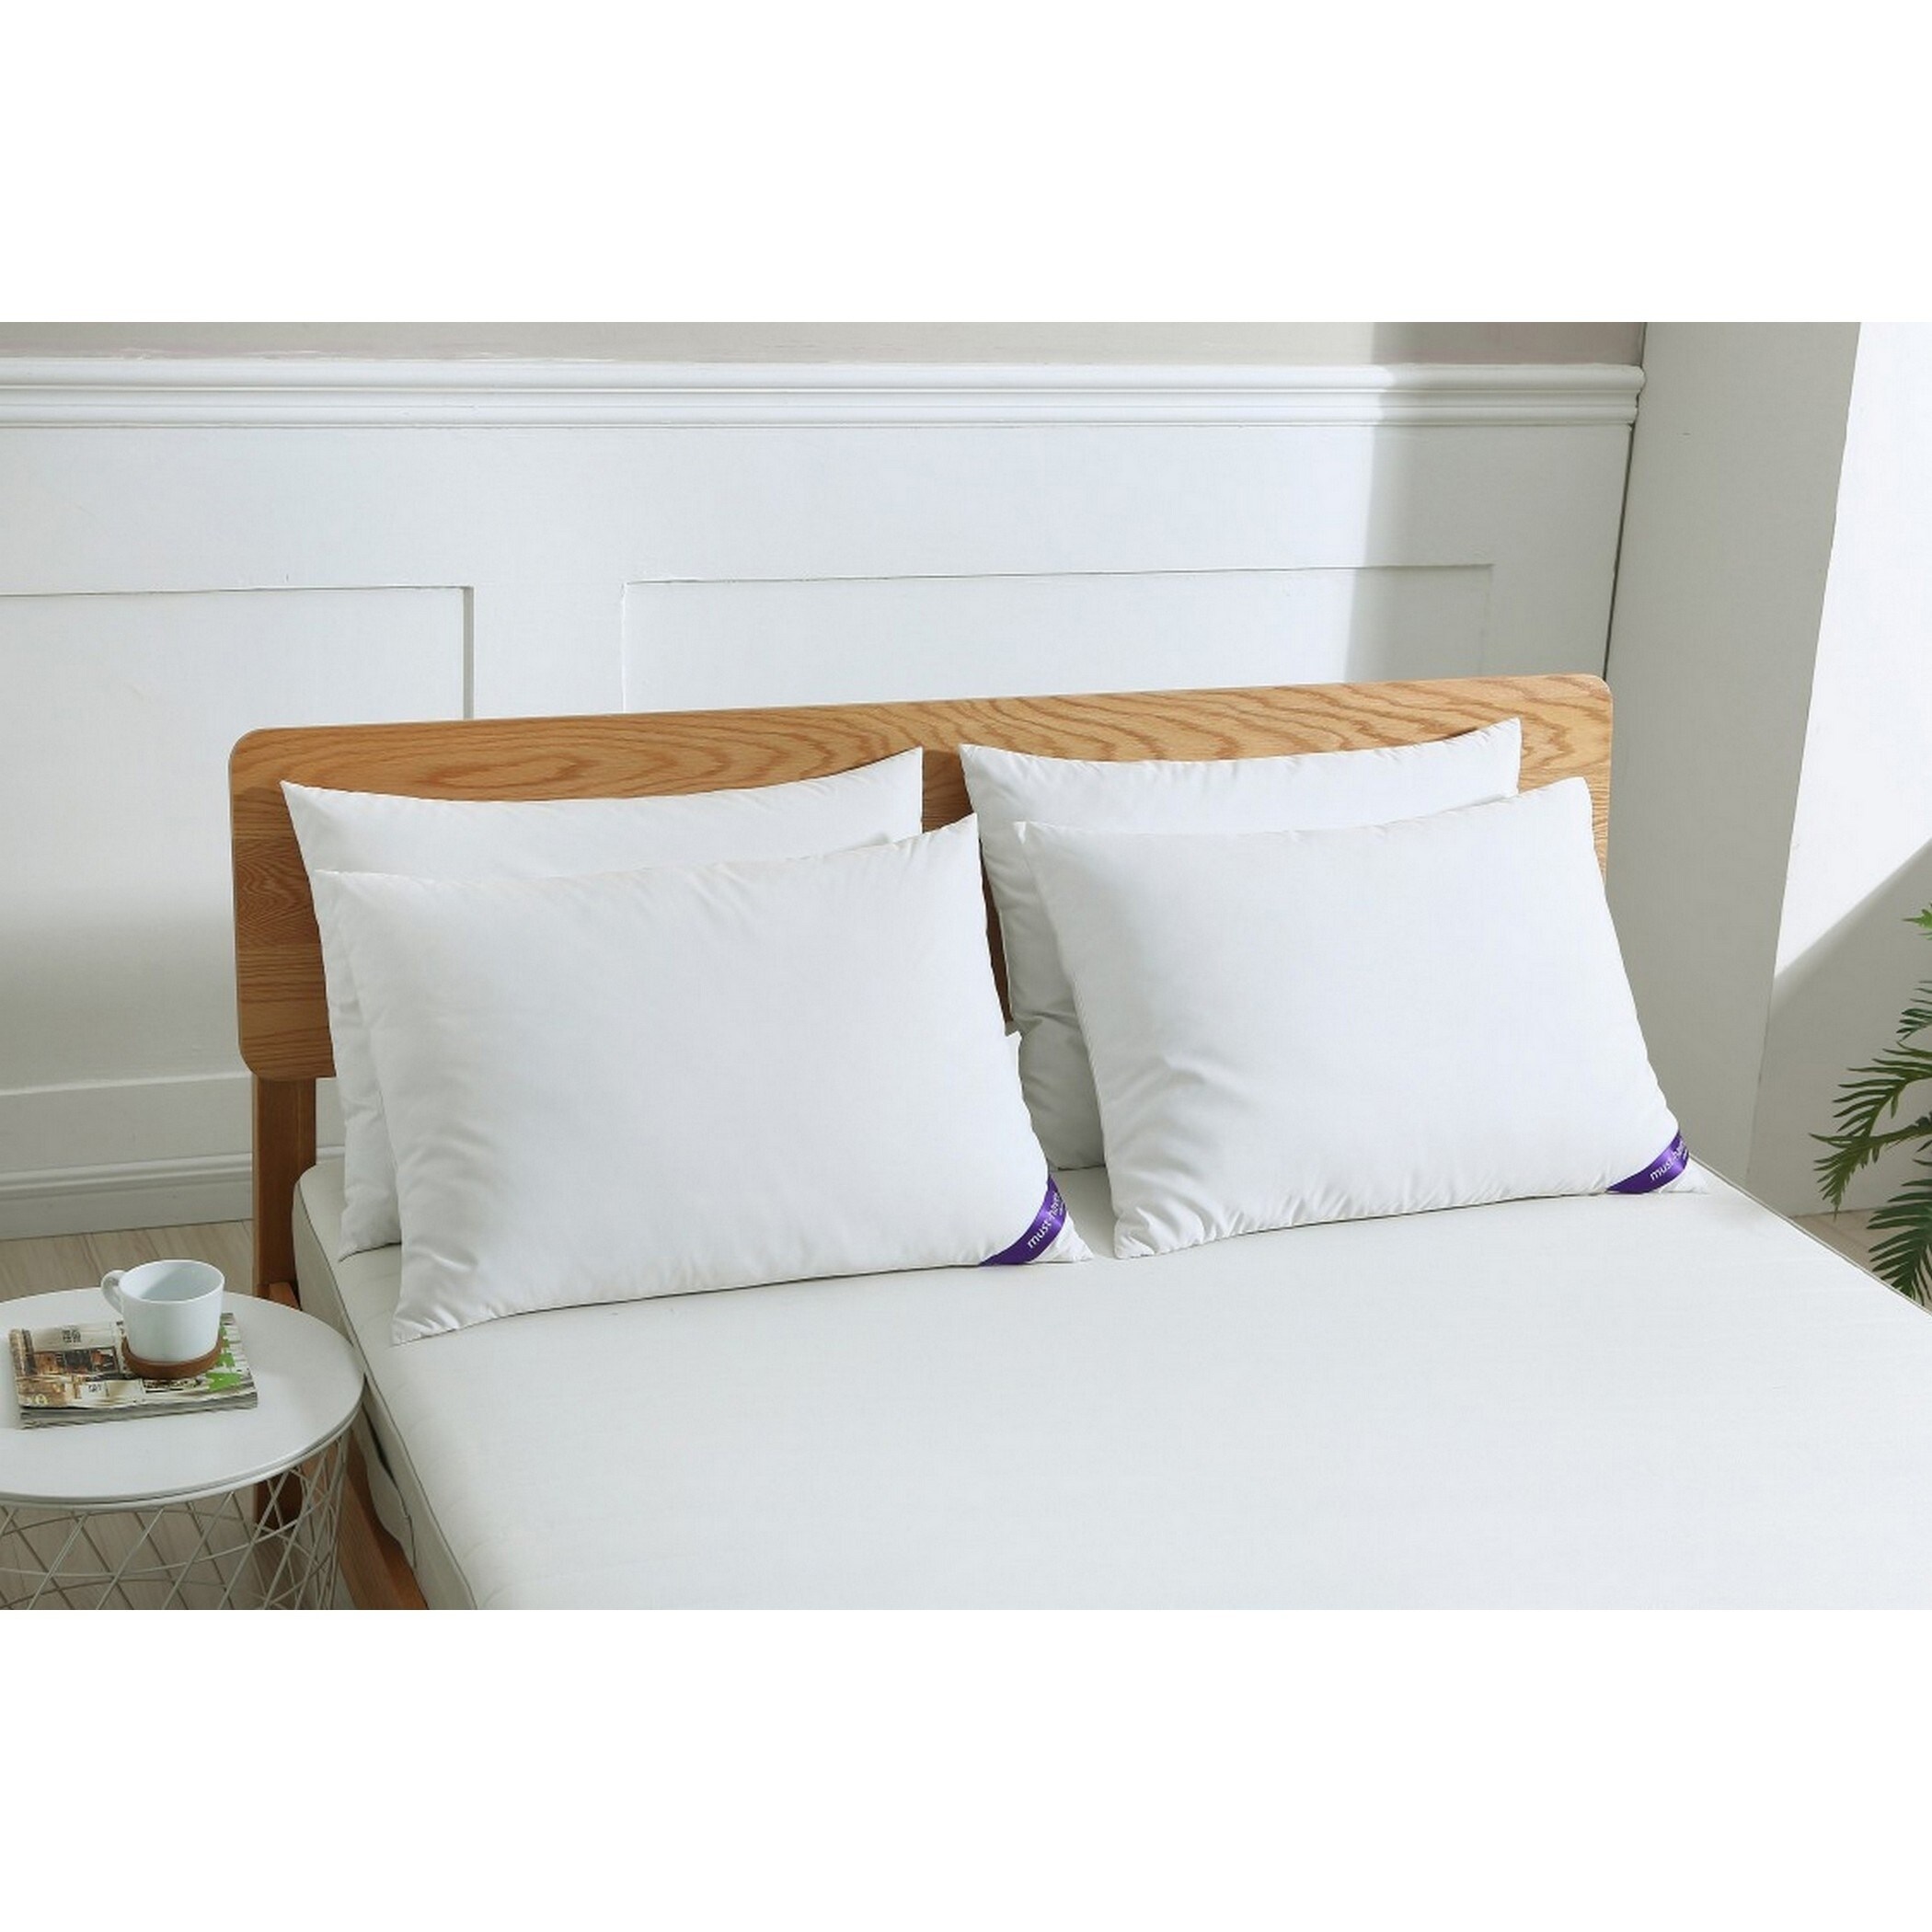 duck and feather pillows